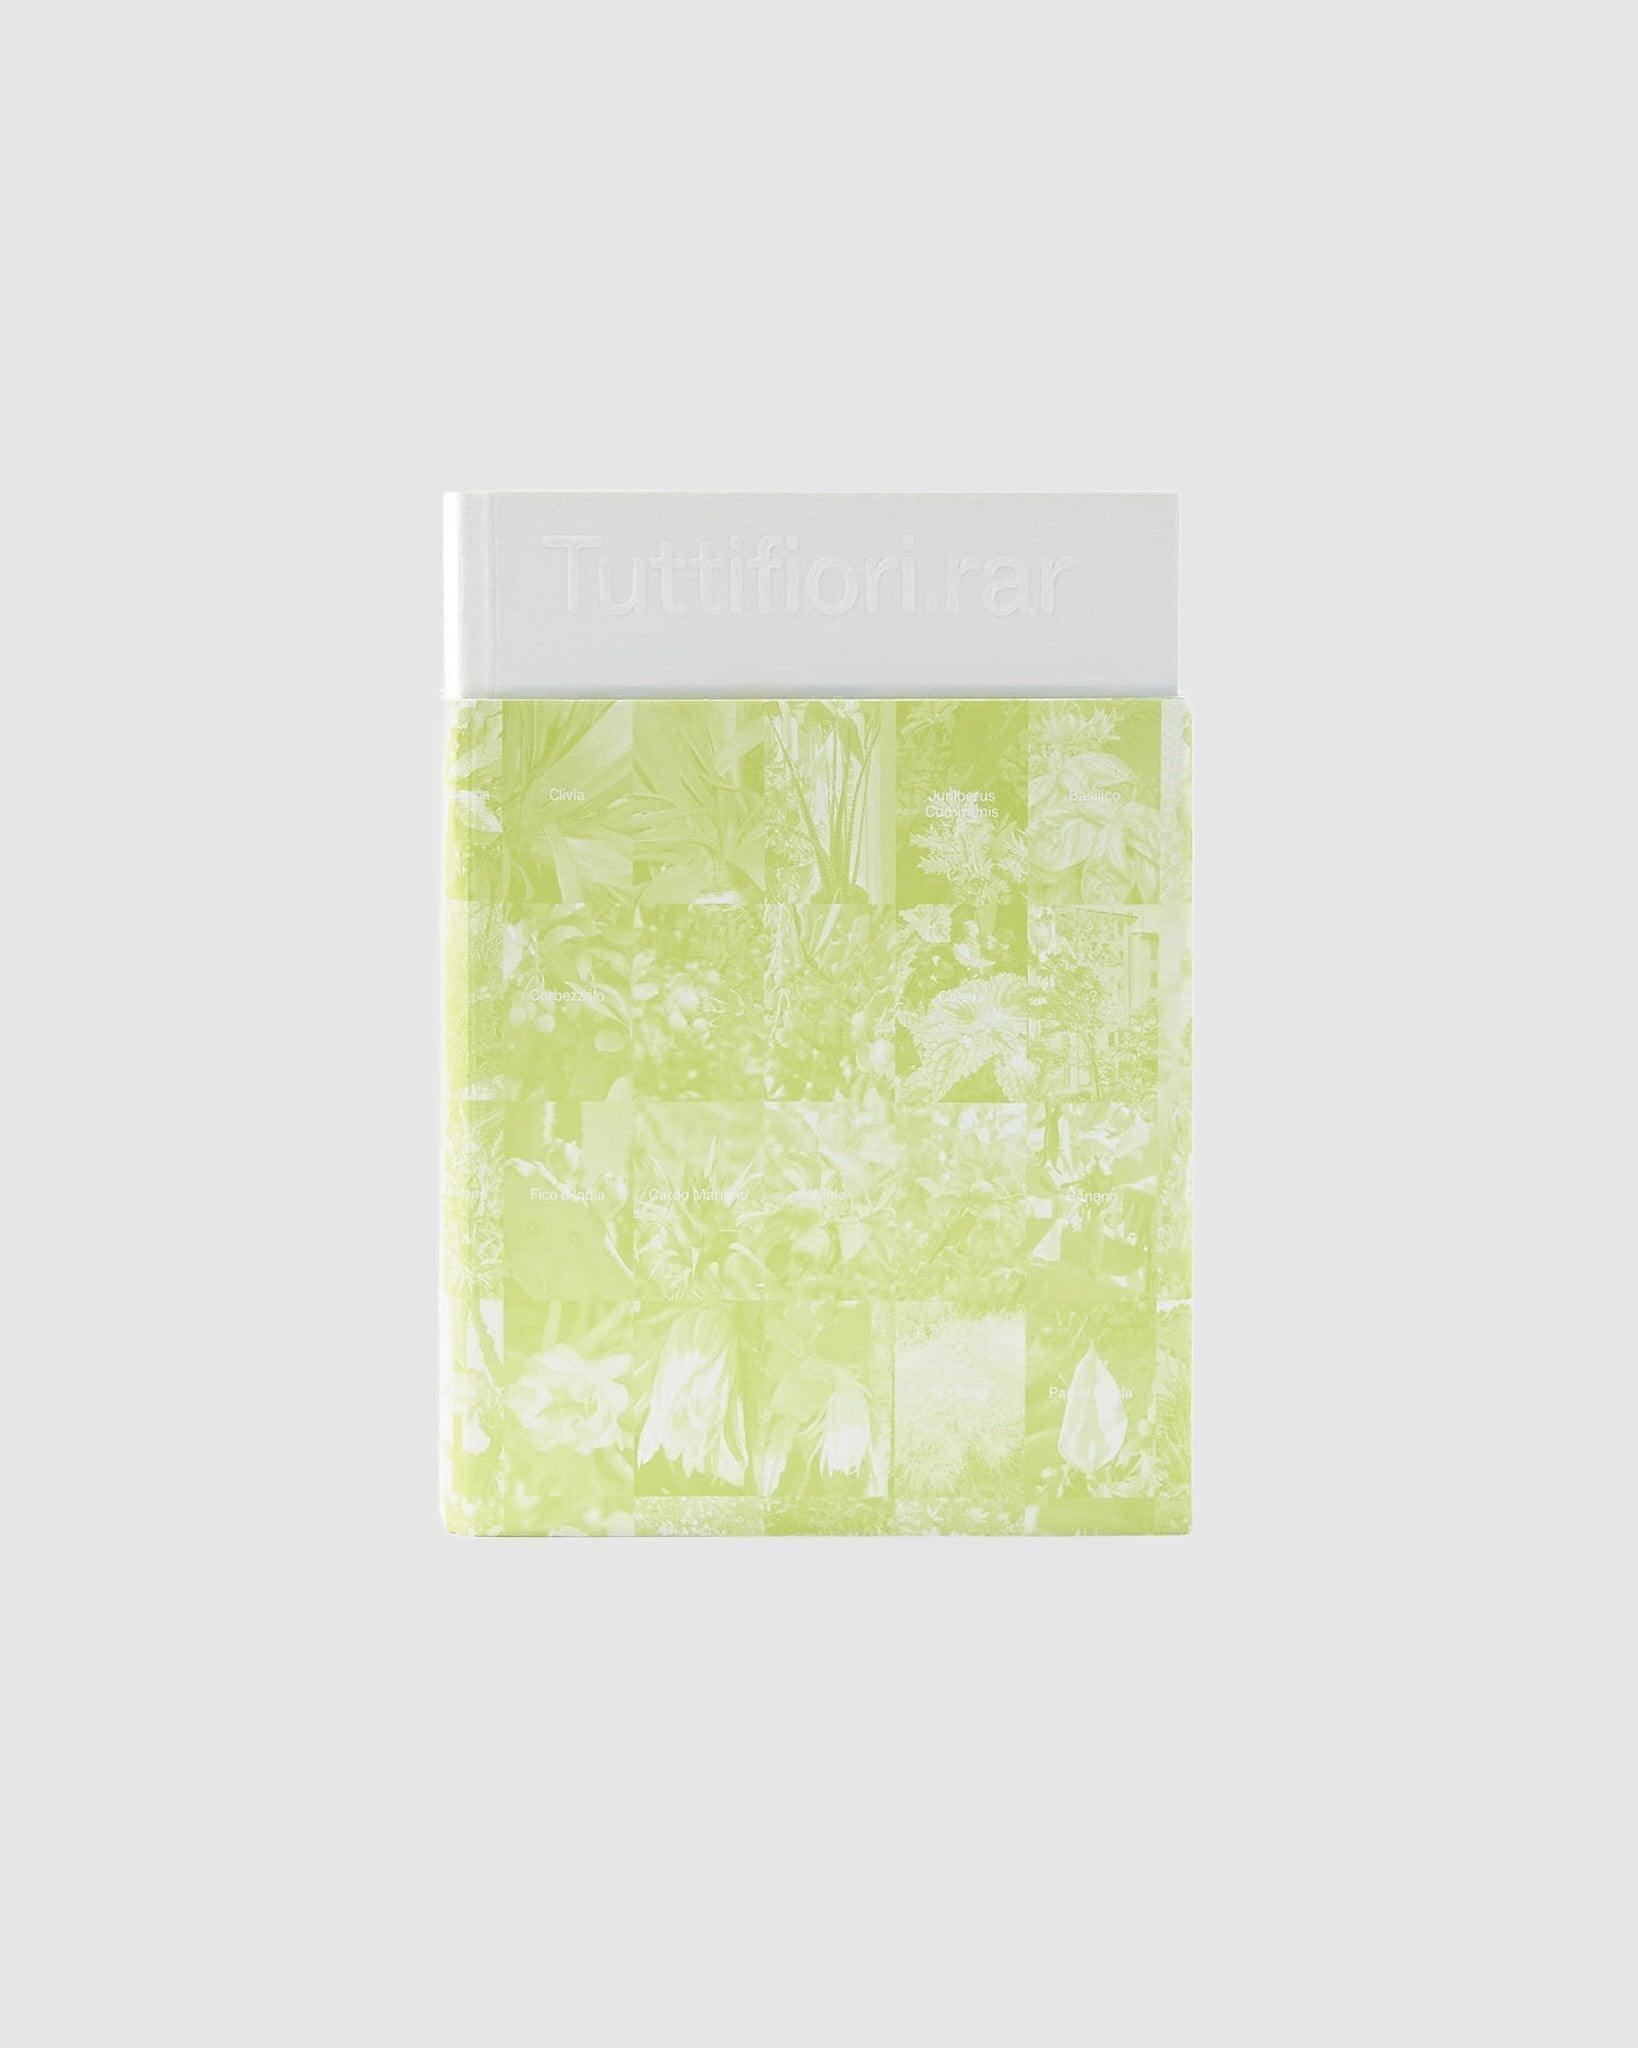 Tuttifiori.rar Book in Lime - {{ collection.title }} - Chinatown Country Club 